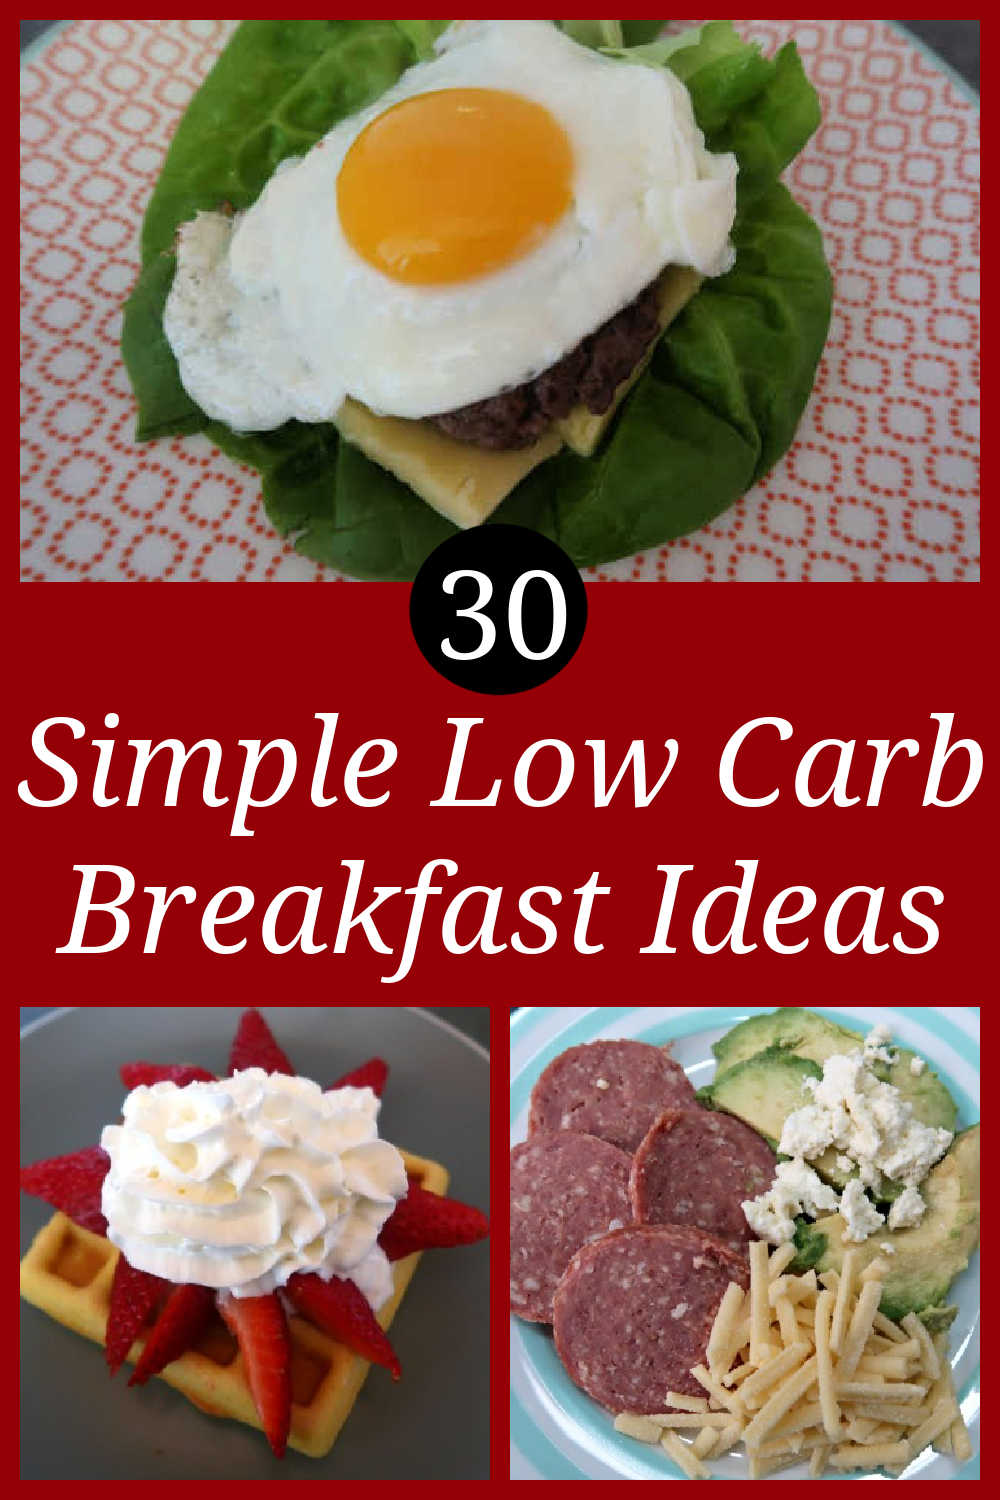 30 Simple Low Carb Breakfast Ideas - easy gluten free and keto diet friendly recipes for breakfasts full of healthy fats, high in protein and low in grams of carbs.